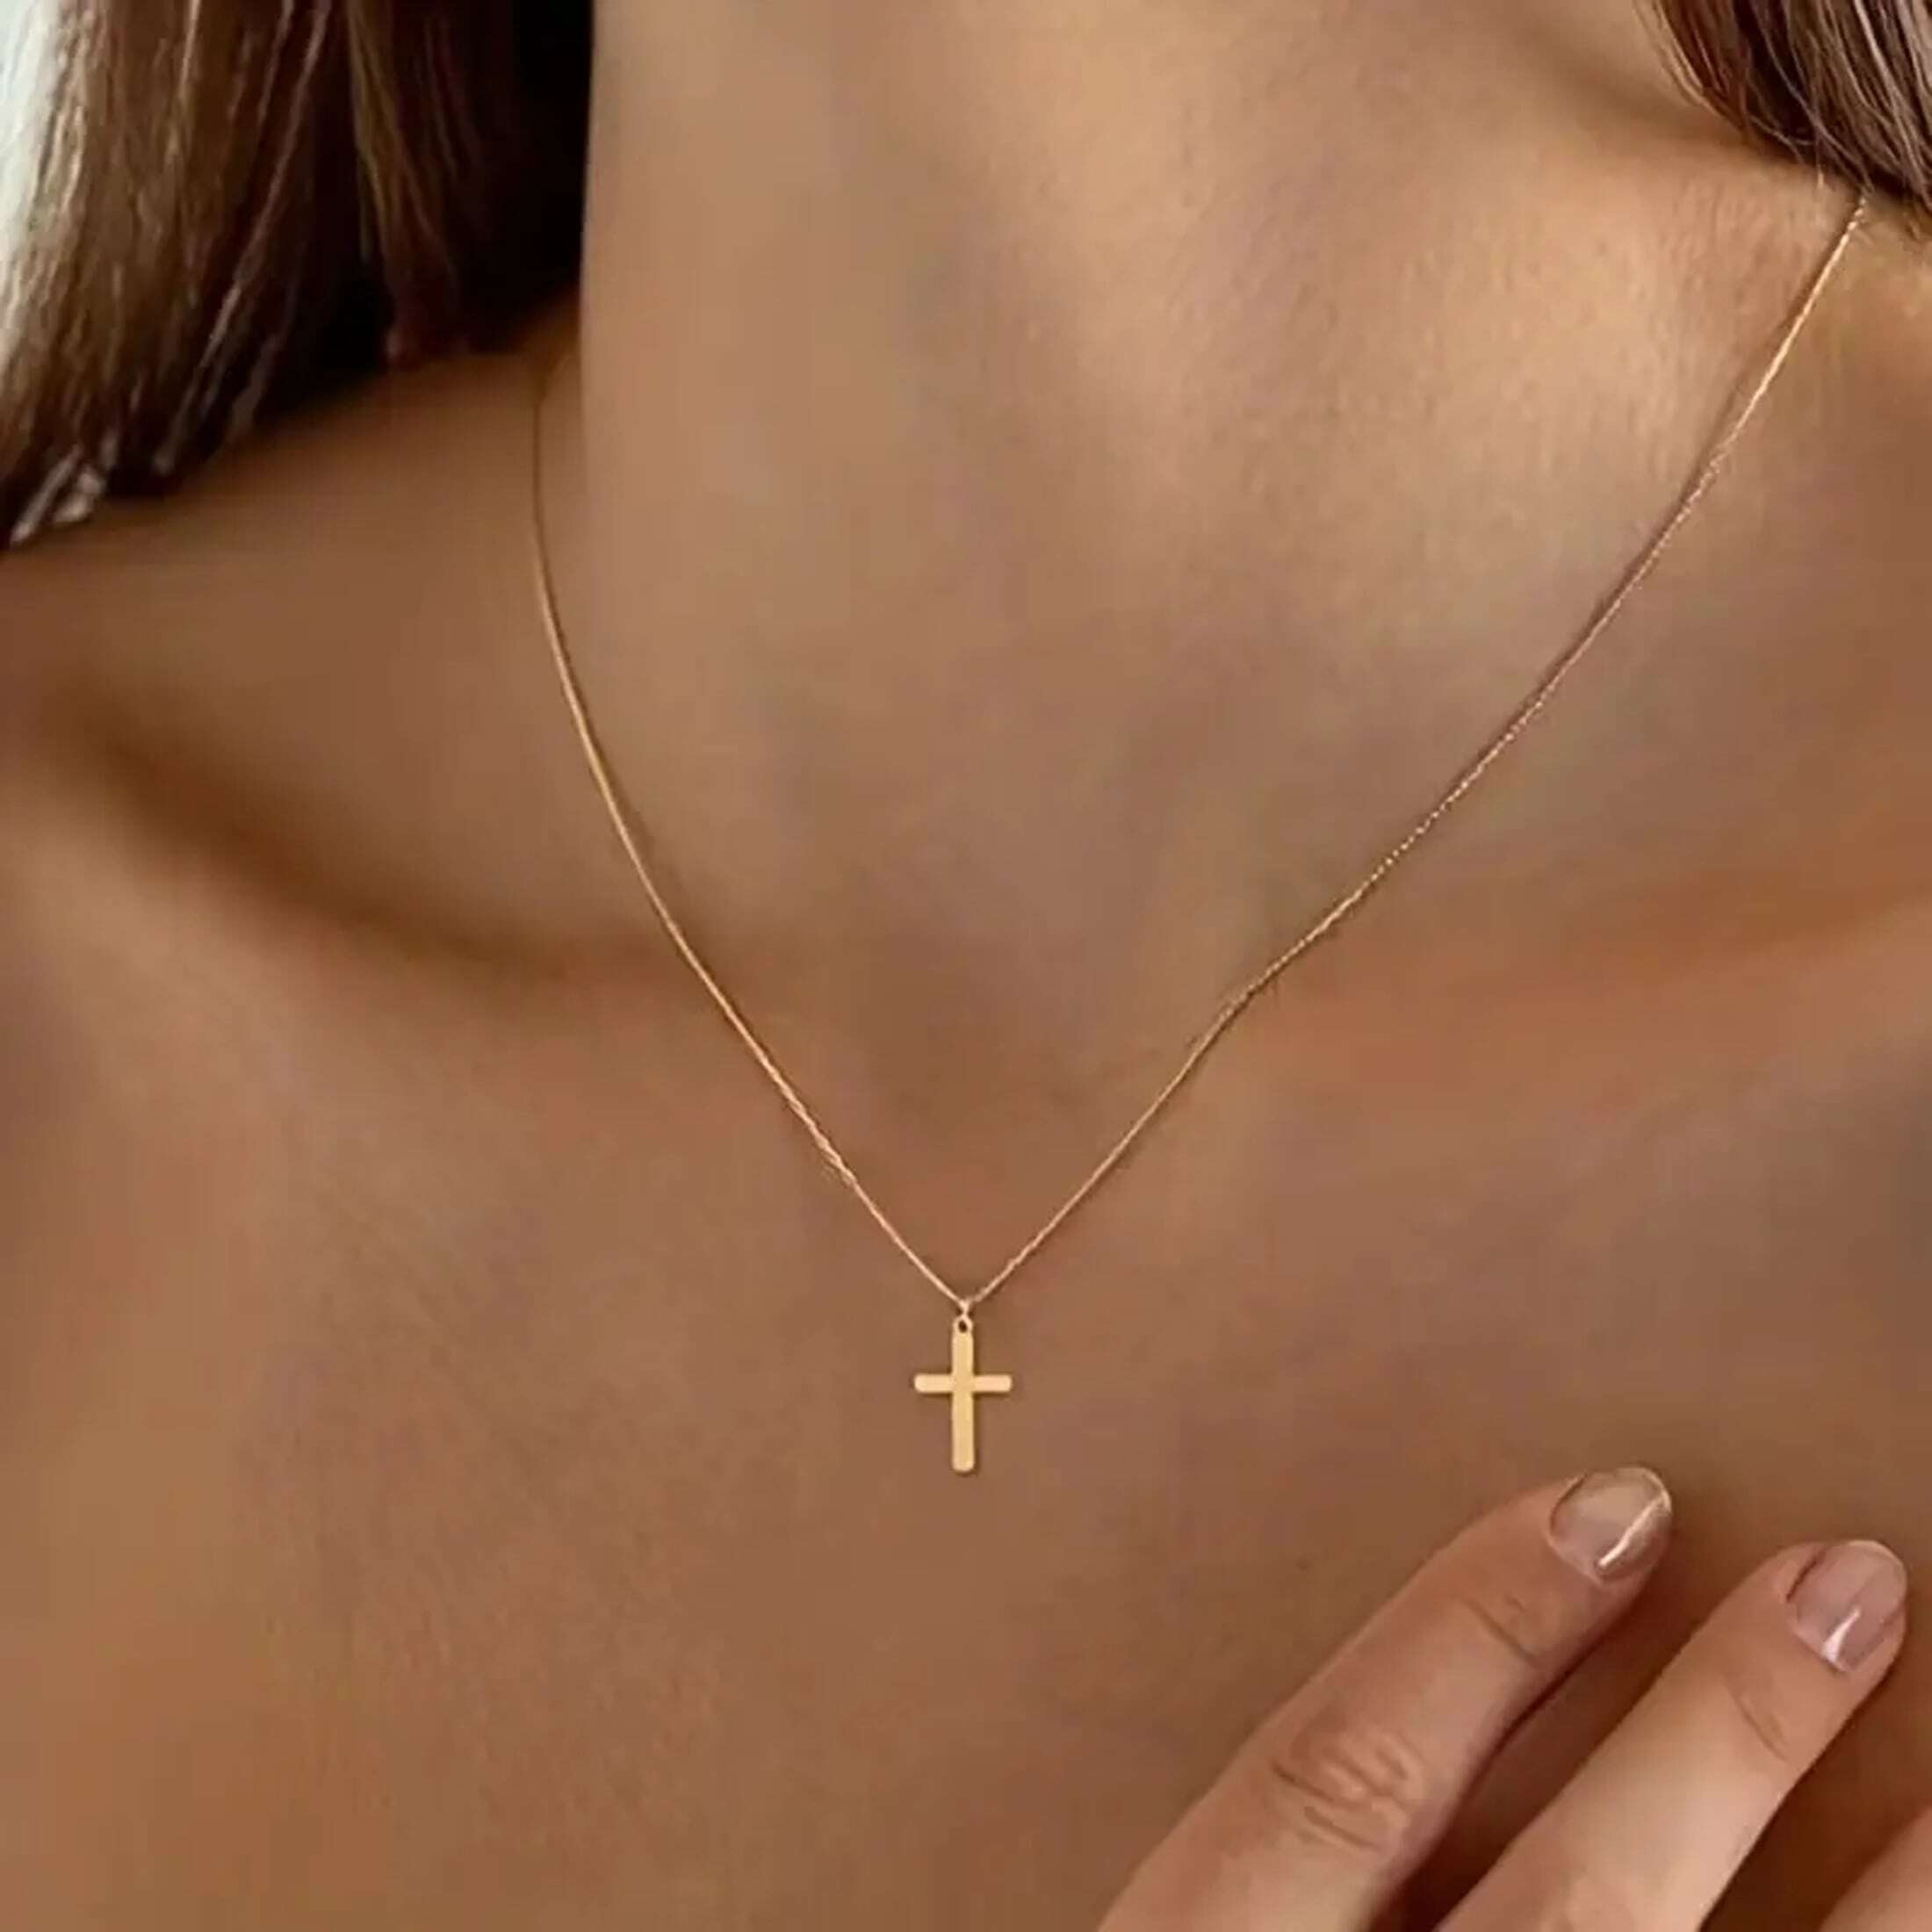 Stainless Steel Necklace Cross Pendant Gift For Women And Girls